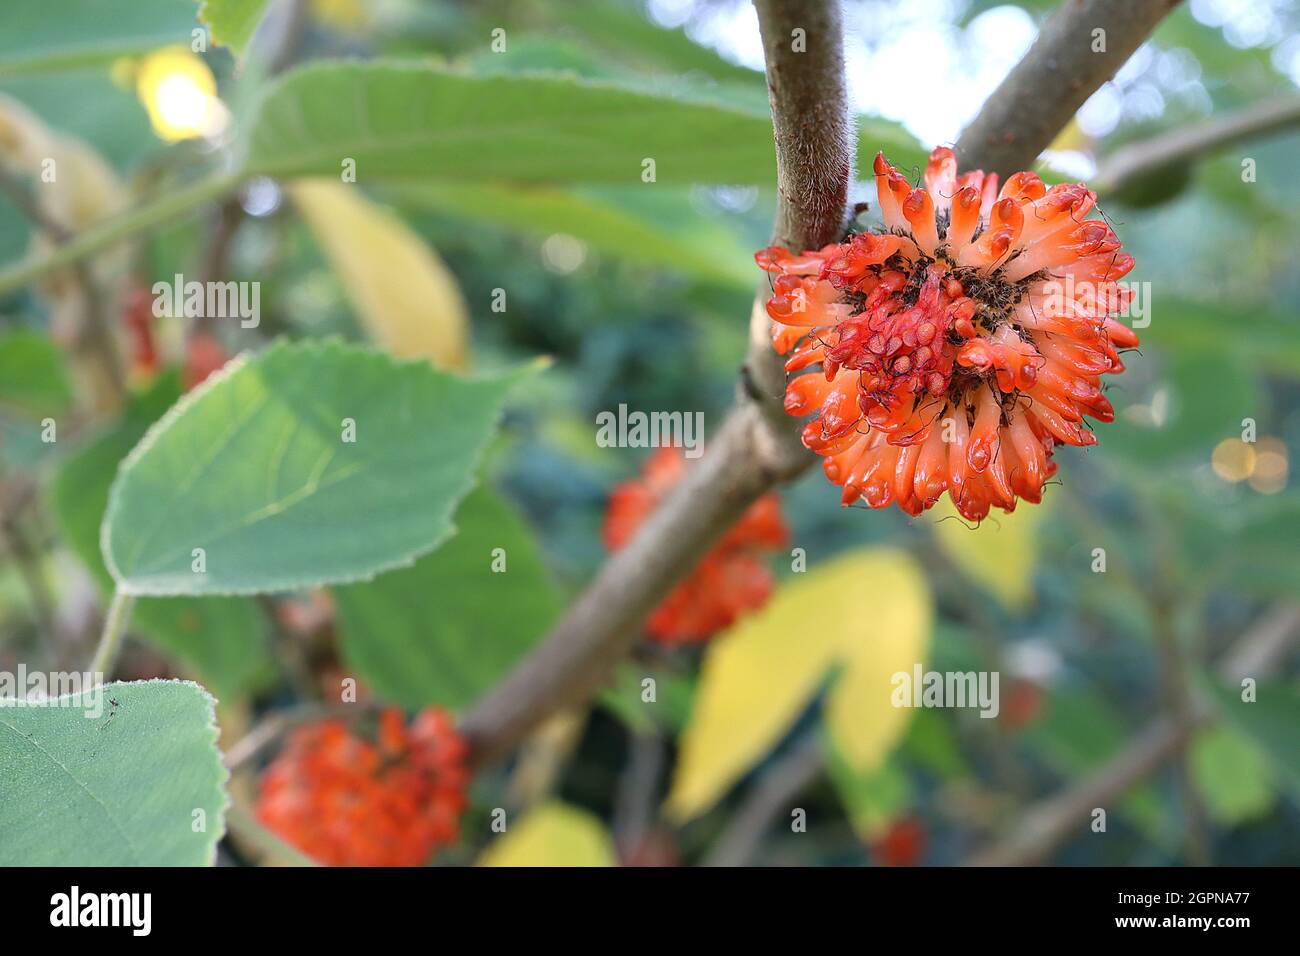 Broussonetia papyrifera paper mulberry – spherical clusters of cylindrical-shaped orange fruit in spherical clusters,  September, England, UK Stock Photo